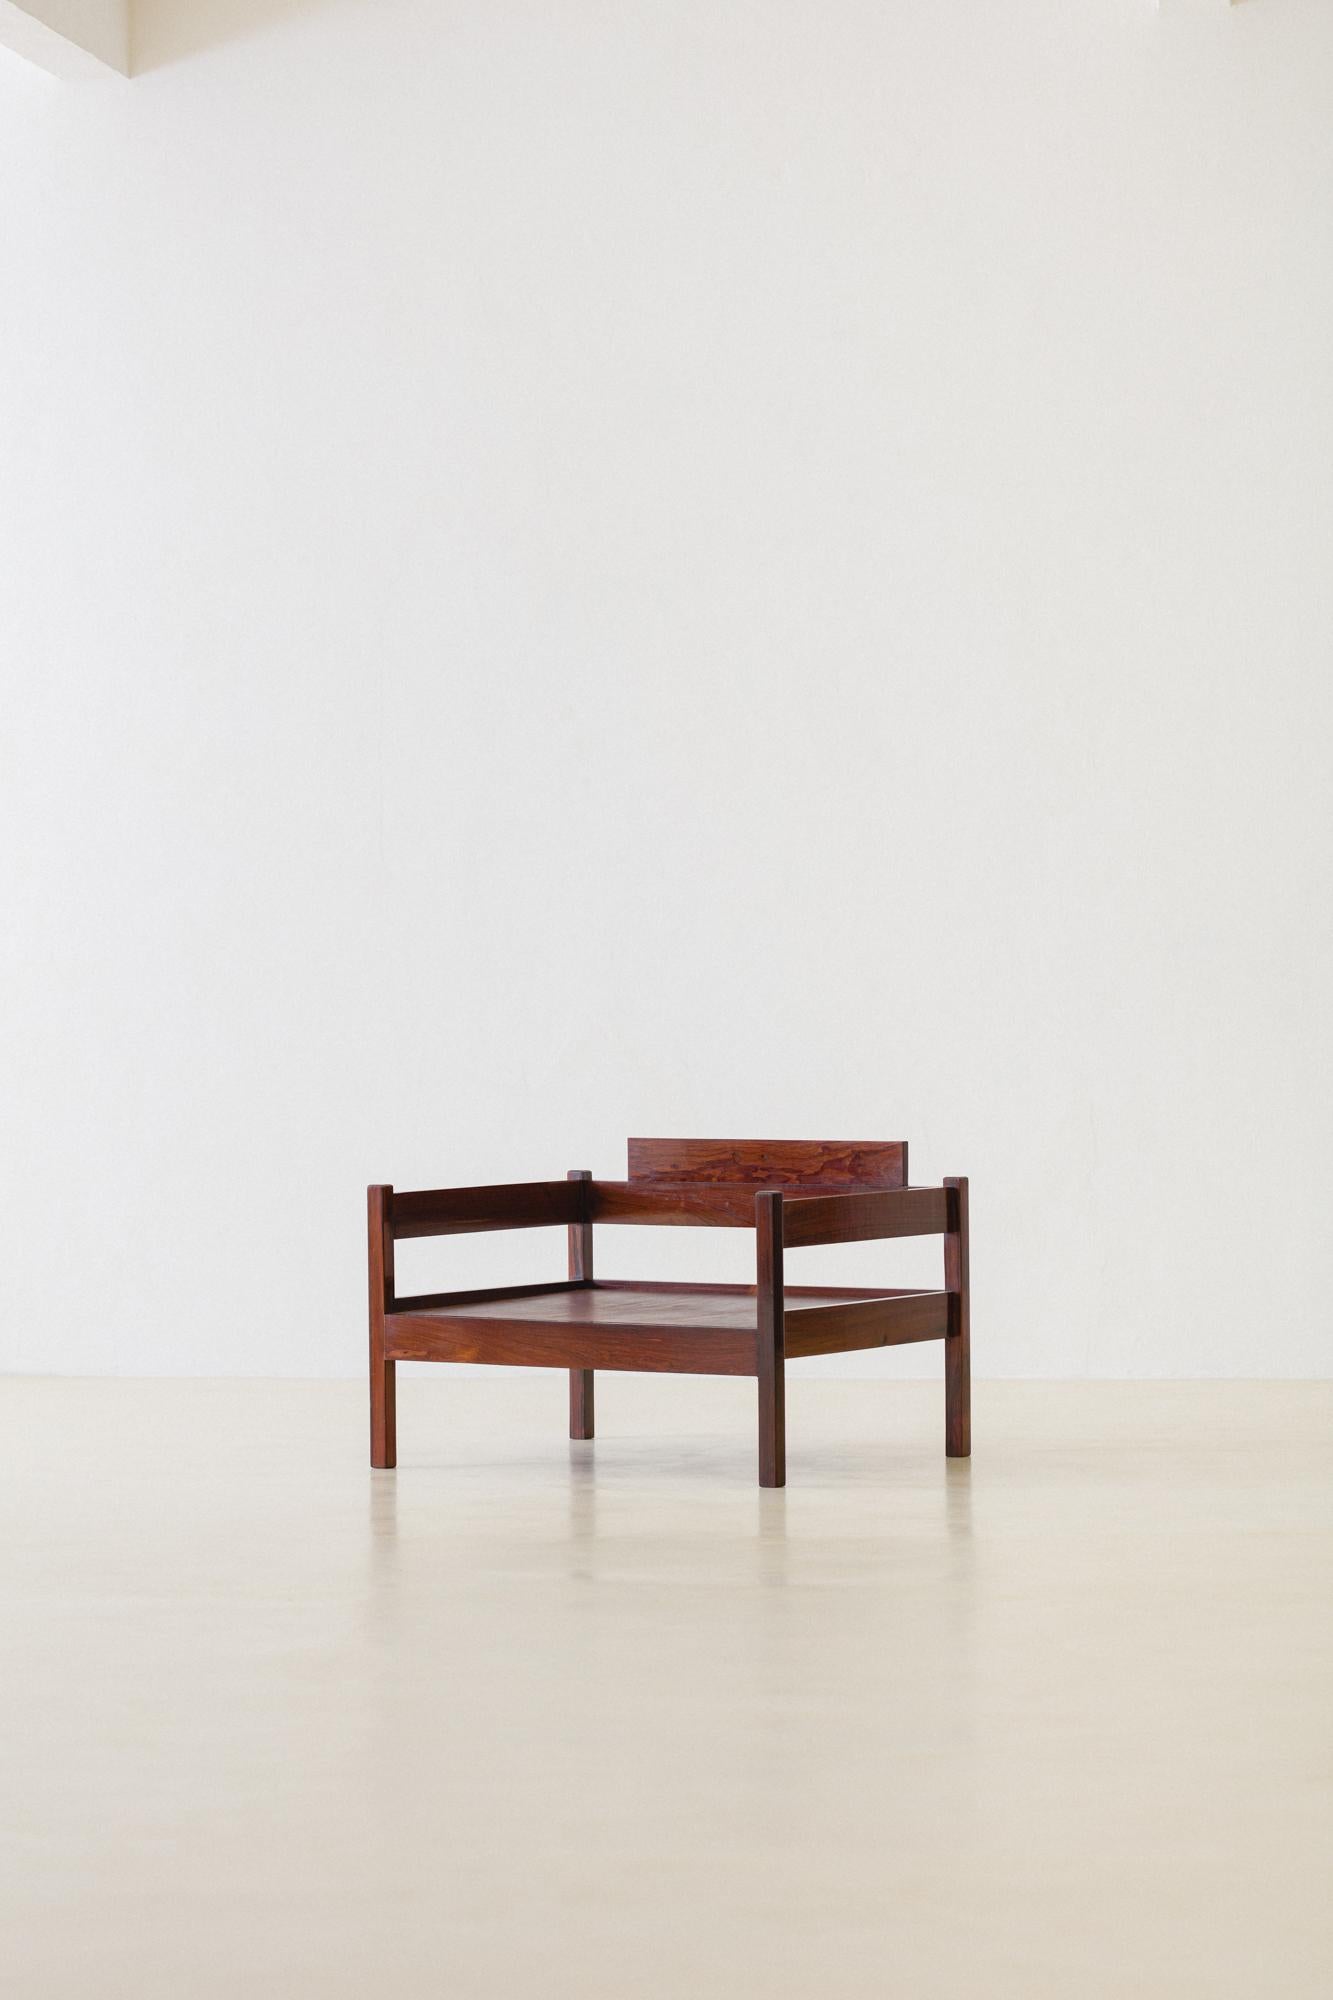 Mid-20th Century Pair of Brazilian Rosewood Armchairs with Ottomans by Celina Decorações, 1960s For Sale